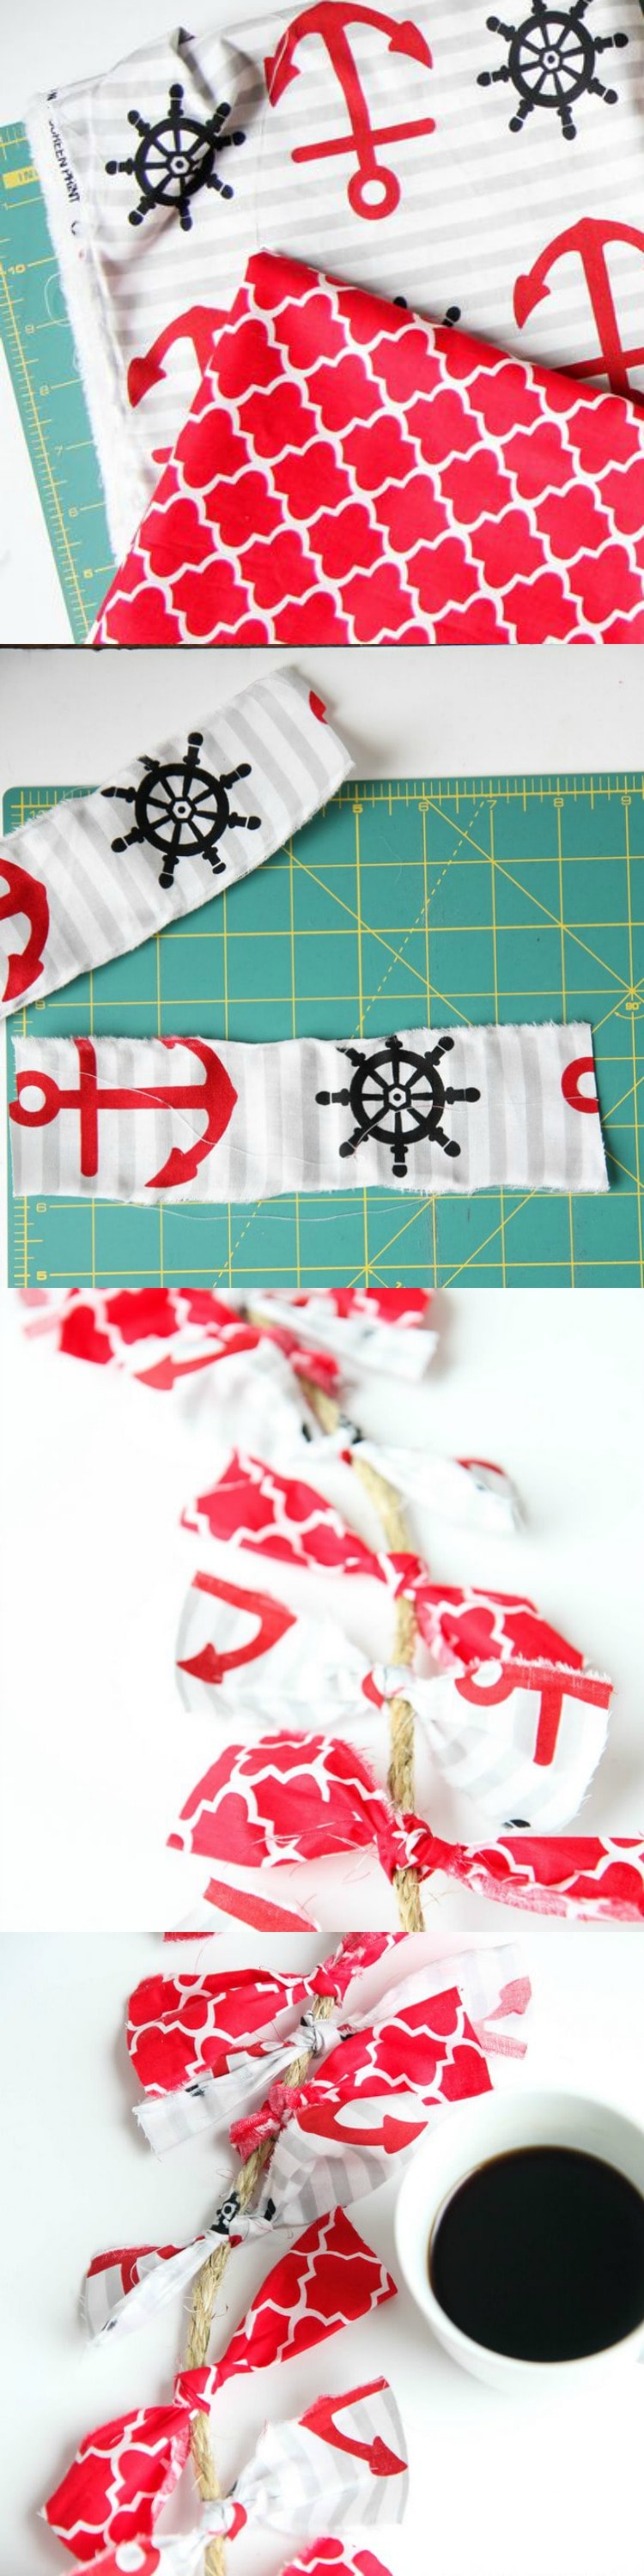 How to Make a Fabric Rope Garland from MomAdvice.com